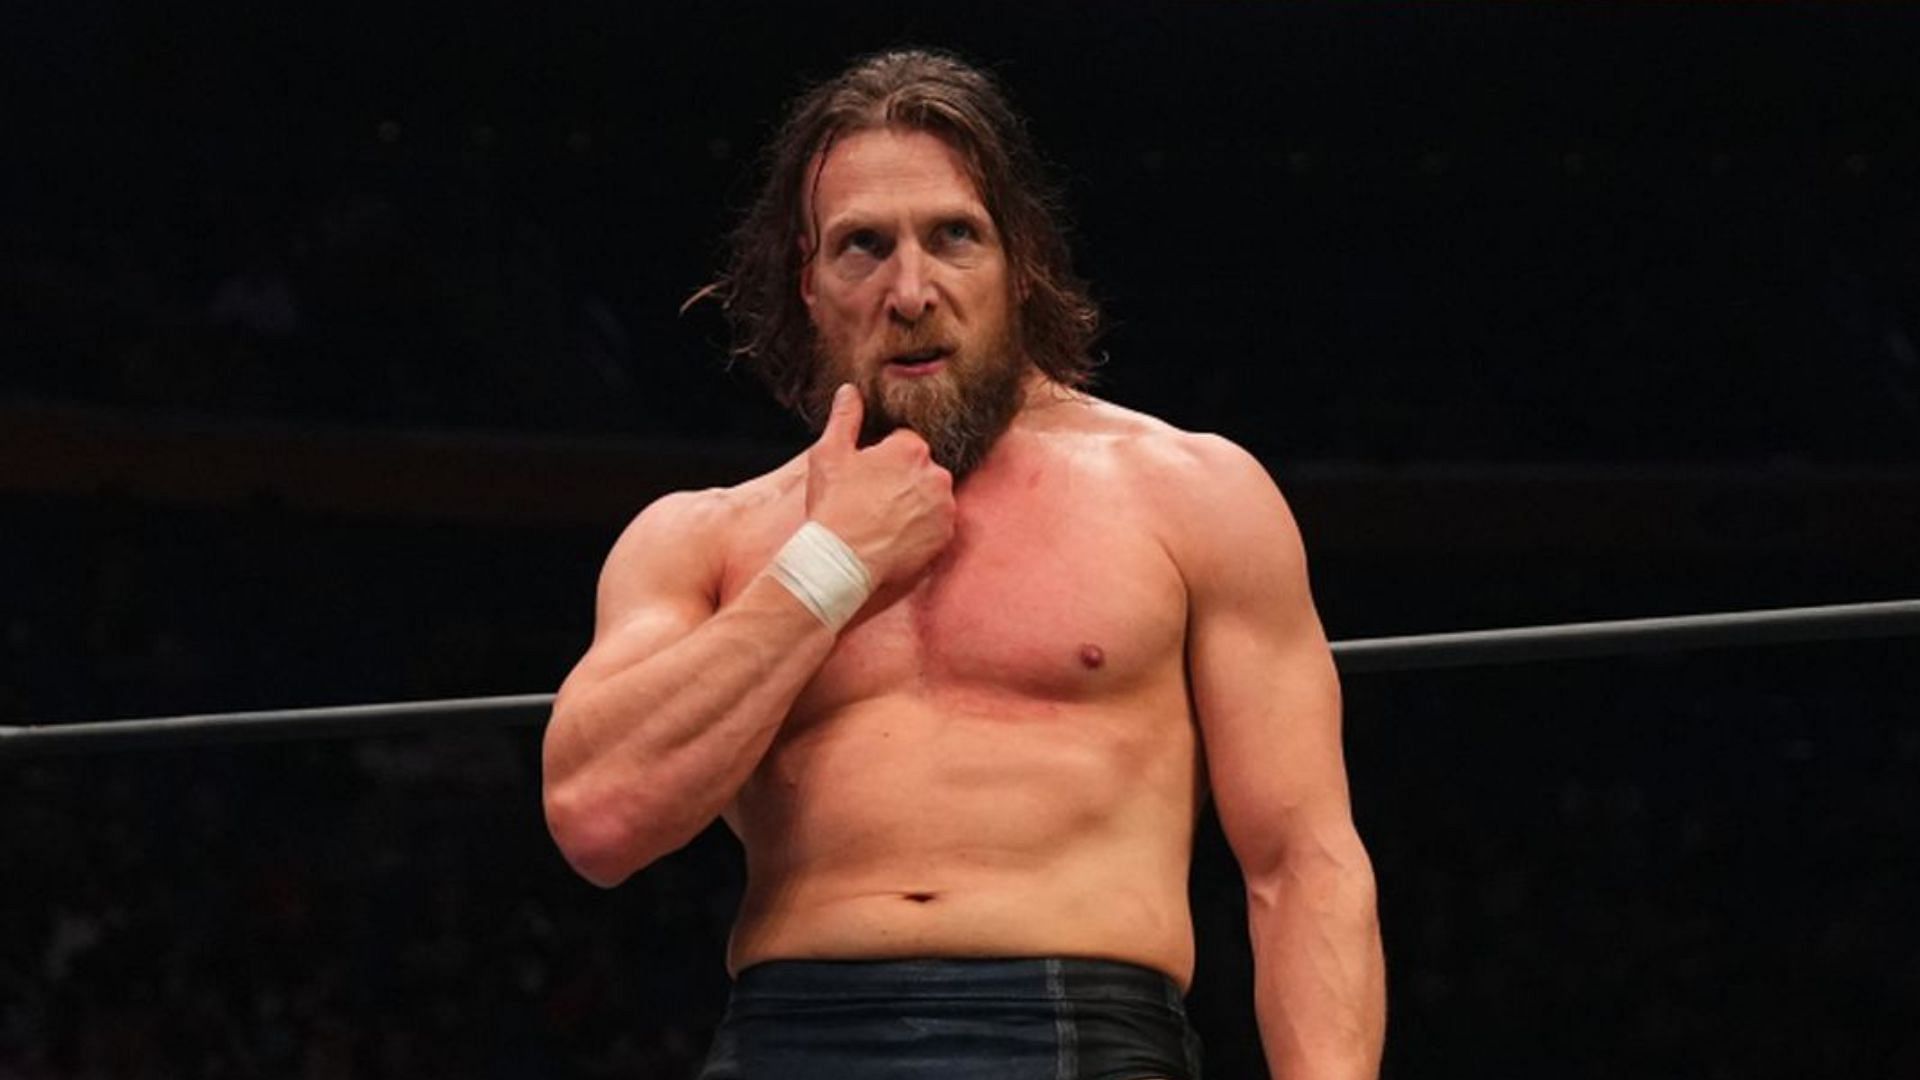 Does Bryan Danielson have enough starpower to headline this event?